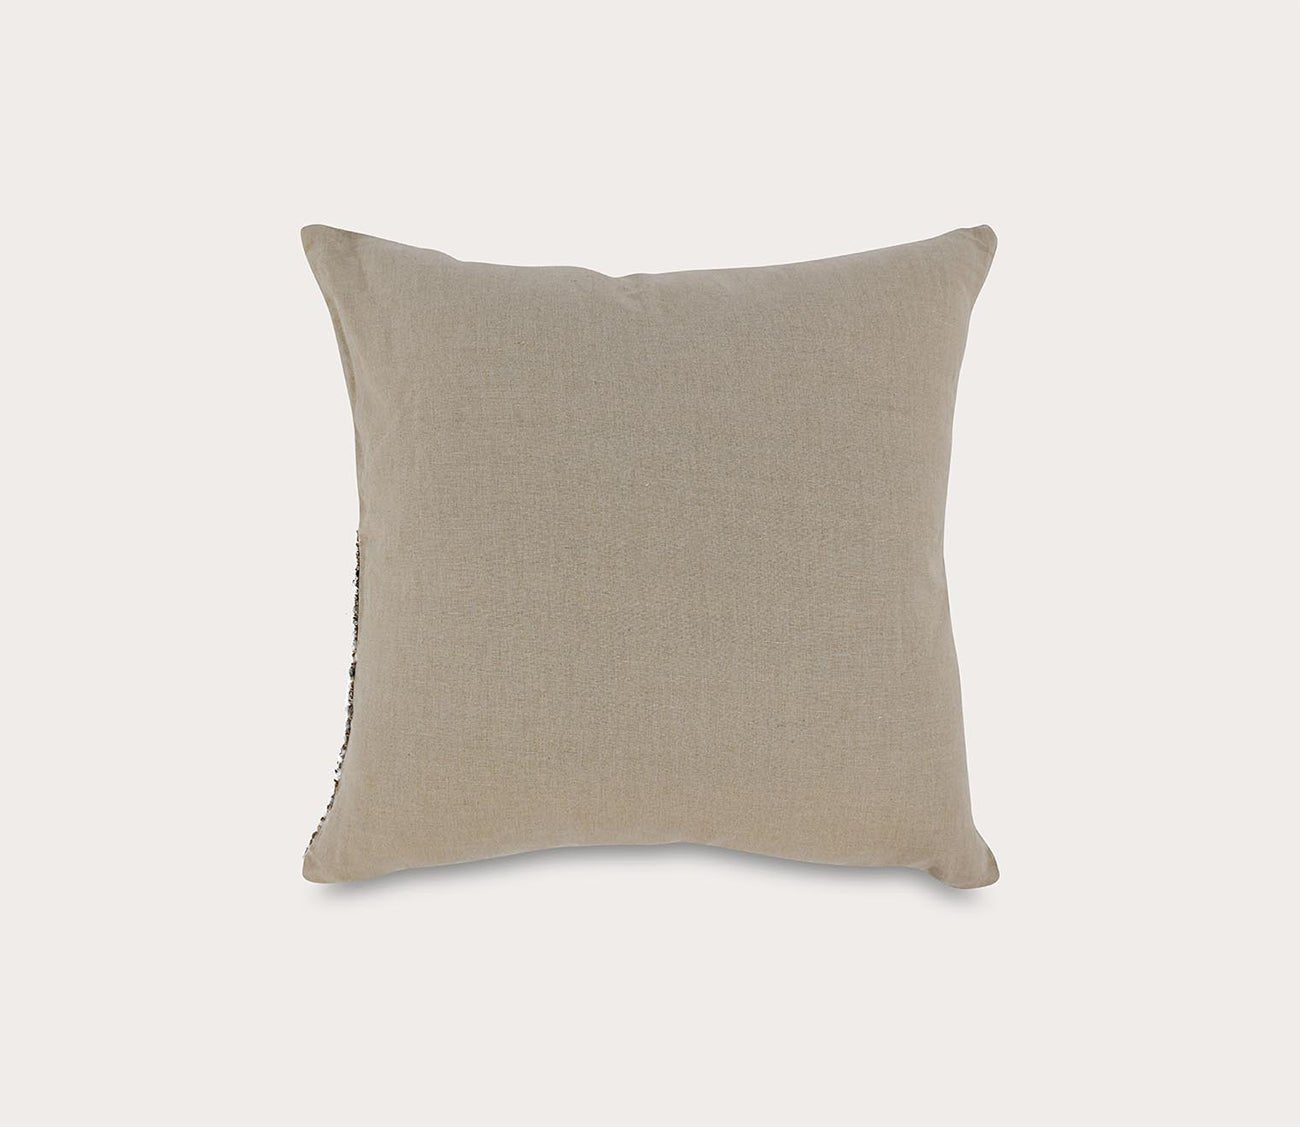 Porter Black Ivory Throw Pillow by Villa by Classic Home